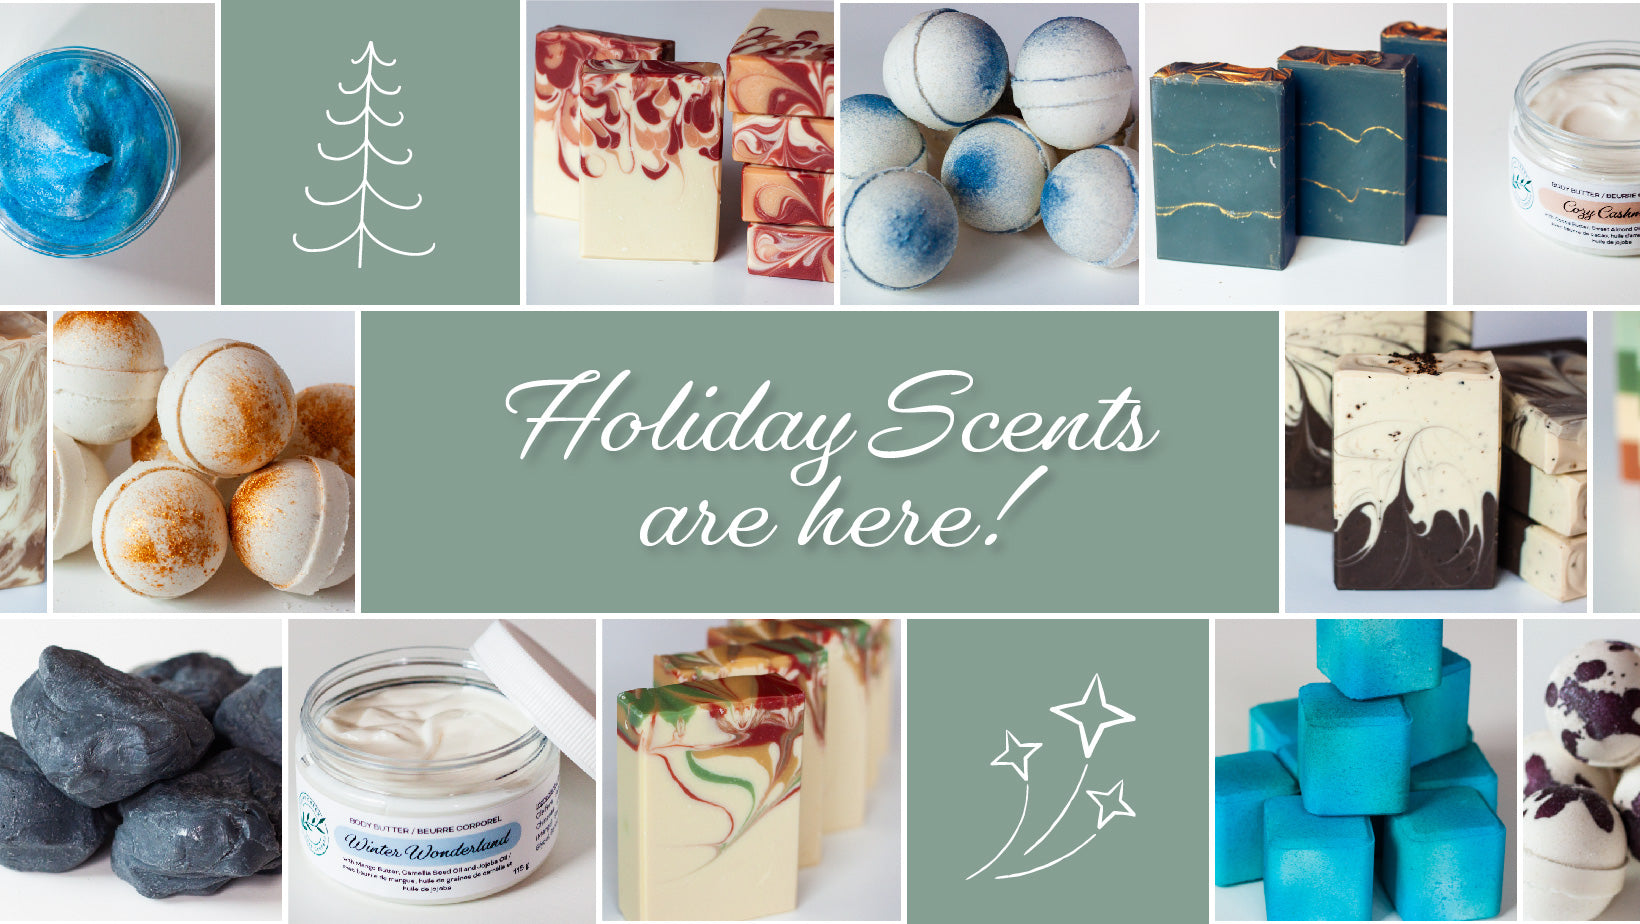 A banner to announce that products for the holiday season are now available online, with a collage of thumbnail images of various soaps, bath bombs, lotions and scrubs